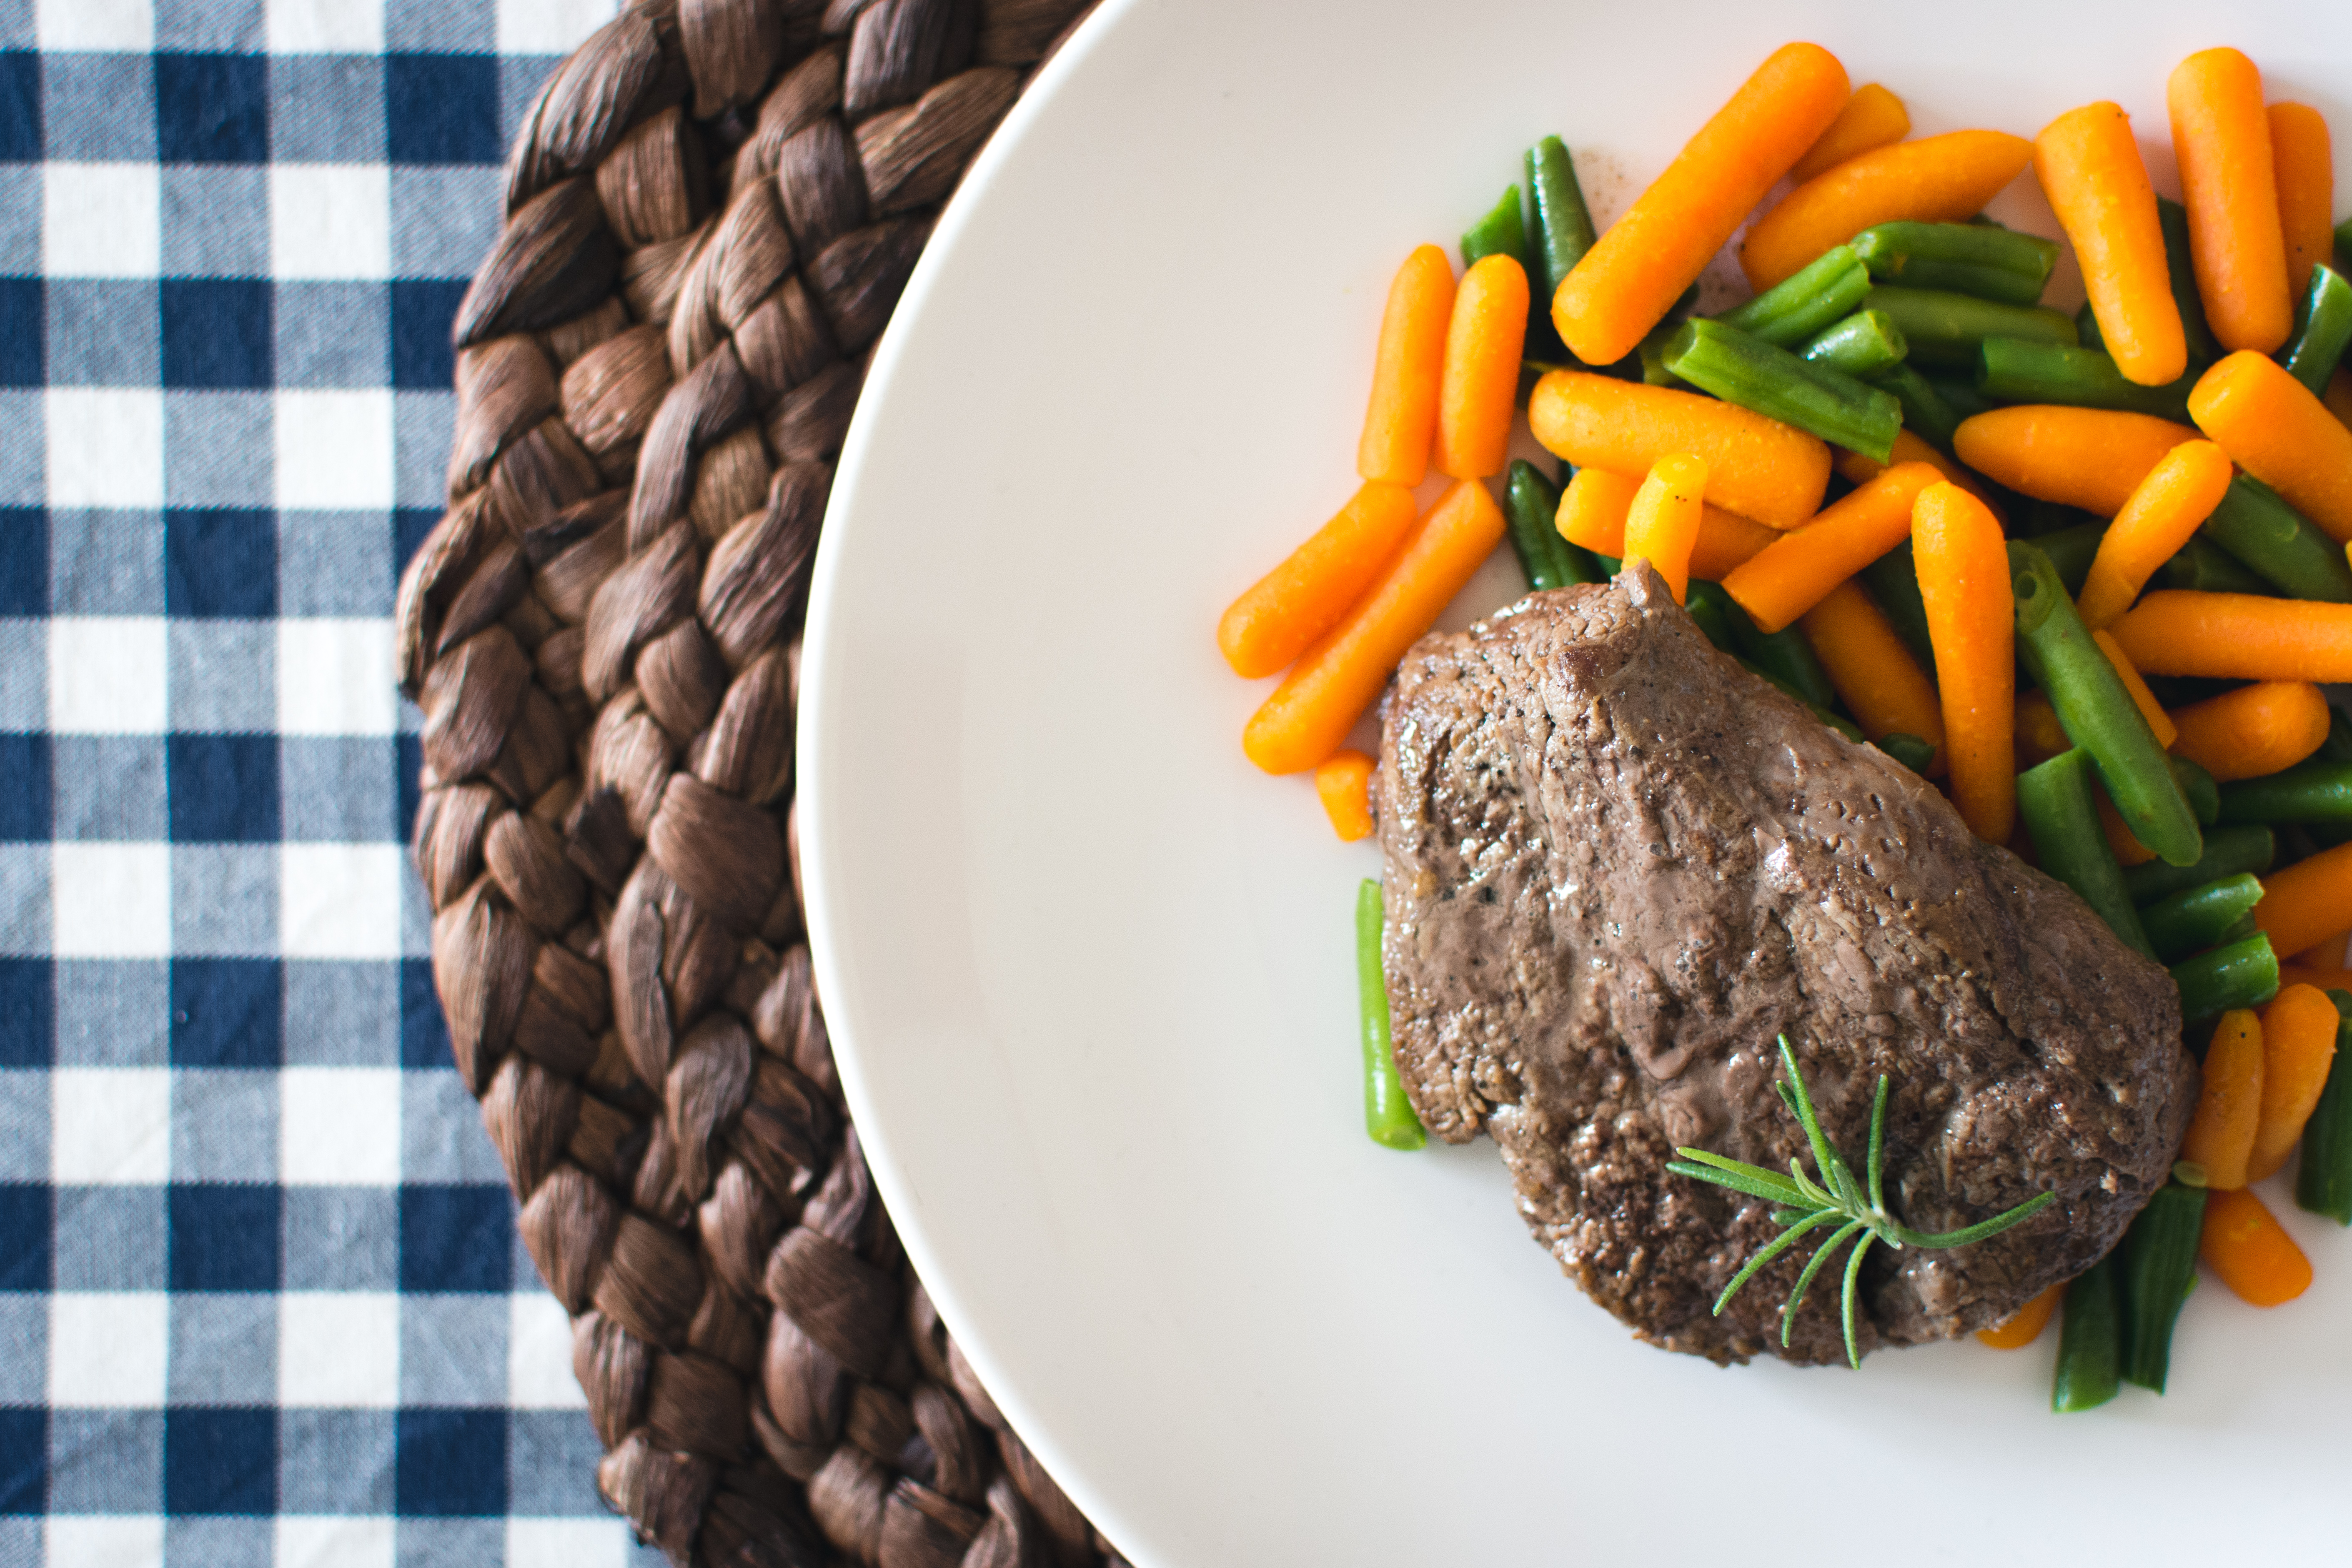 Beef steak with mini carrots and green beans by Jakub Kapusnak